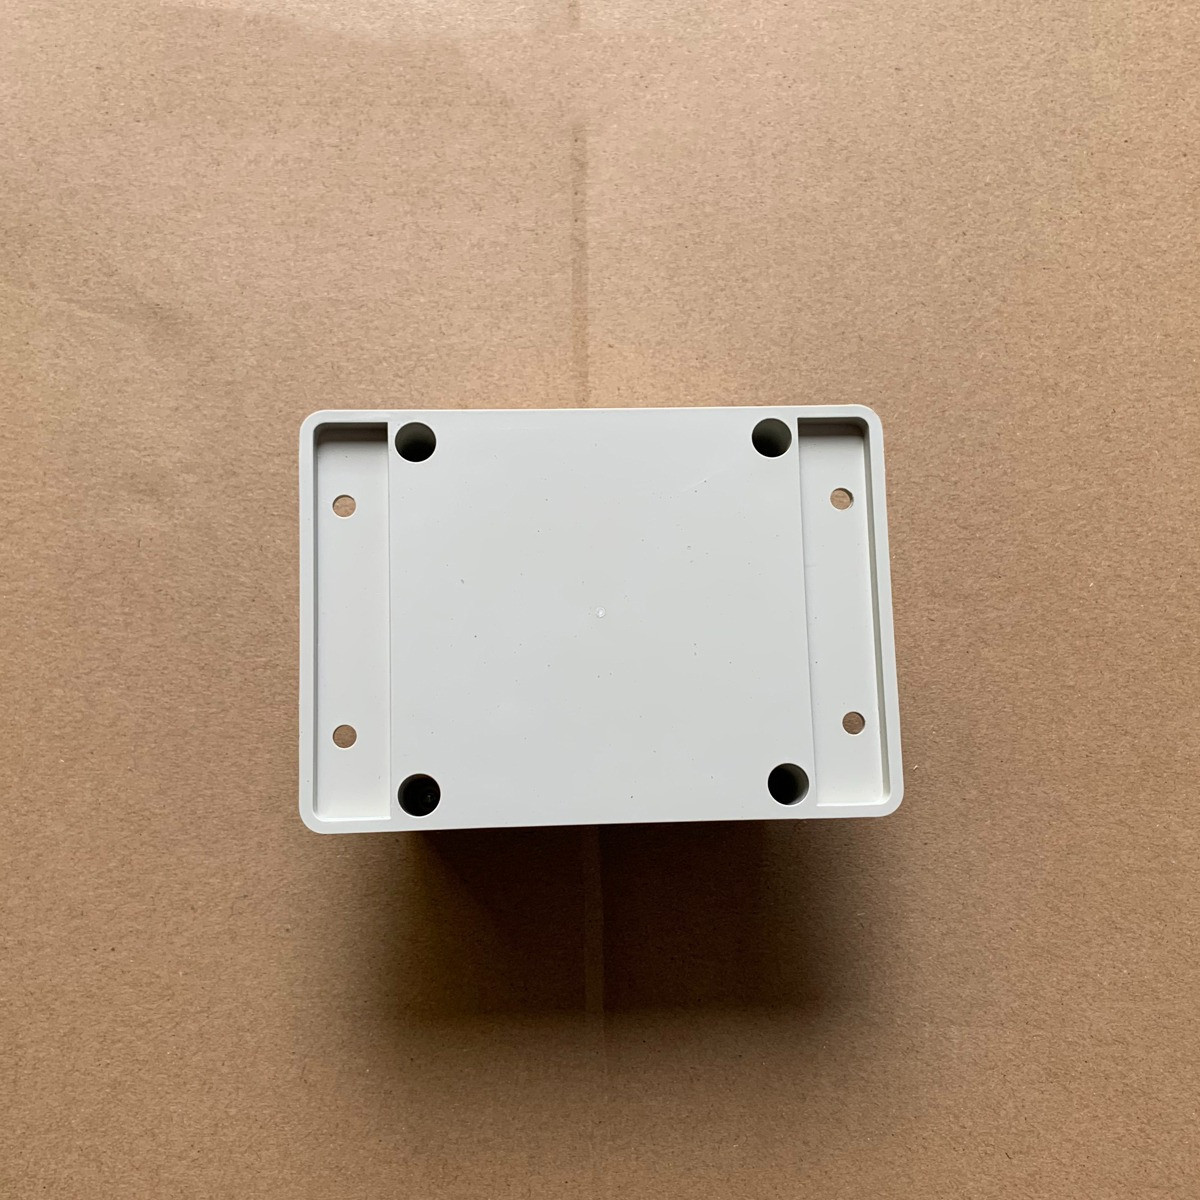 Cheap ABS Ip65 Waterproof Electrical Junction Box Switch Enclosure 83*81*56mm With Ear wholesale